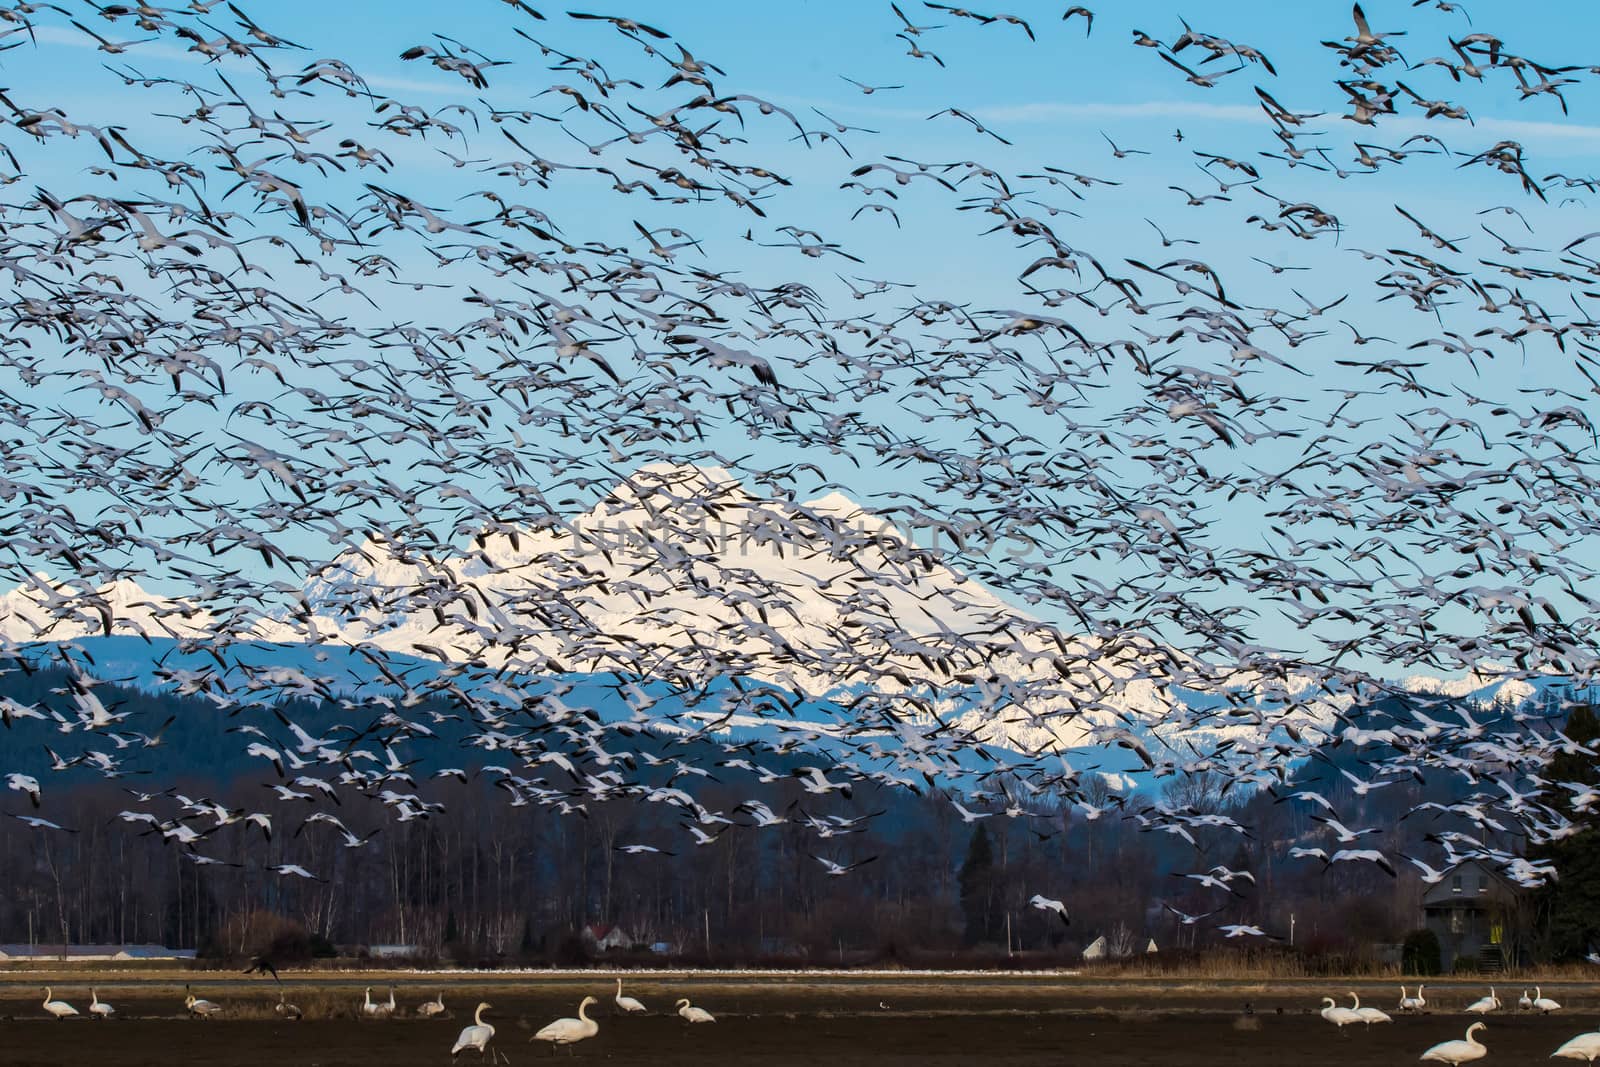 Snow Geese flying over Skagit Valley, WA during their annual migration